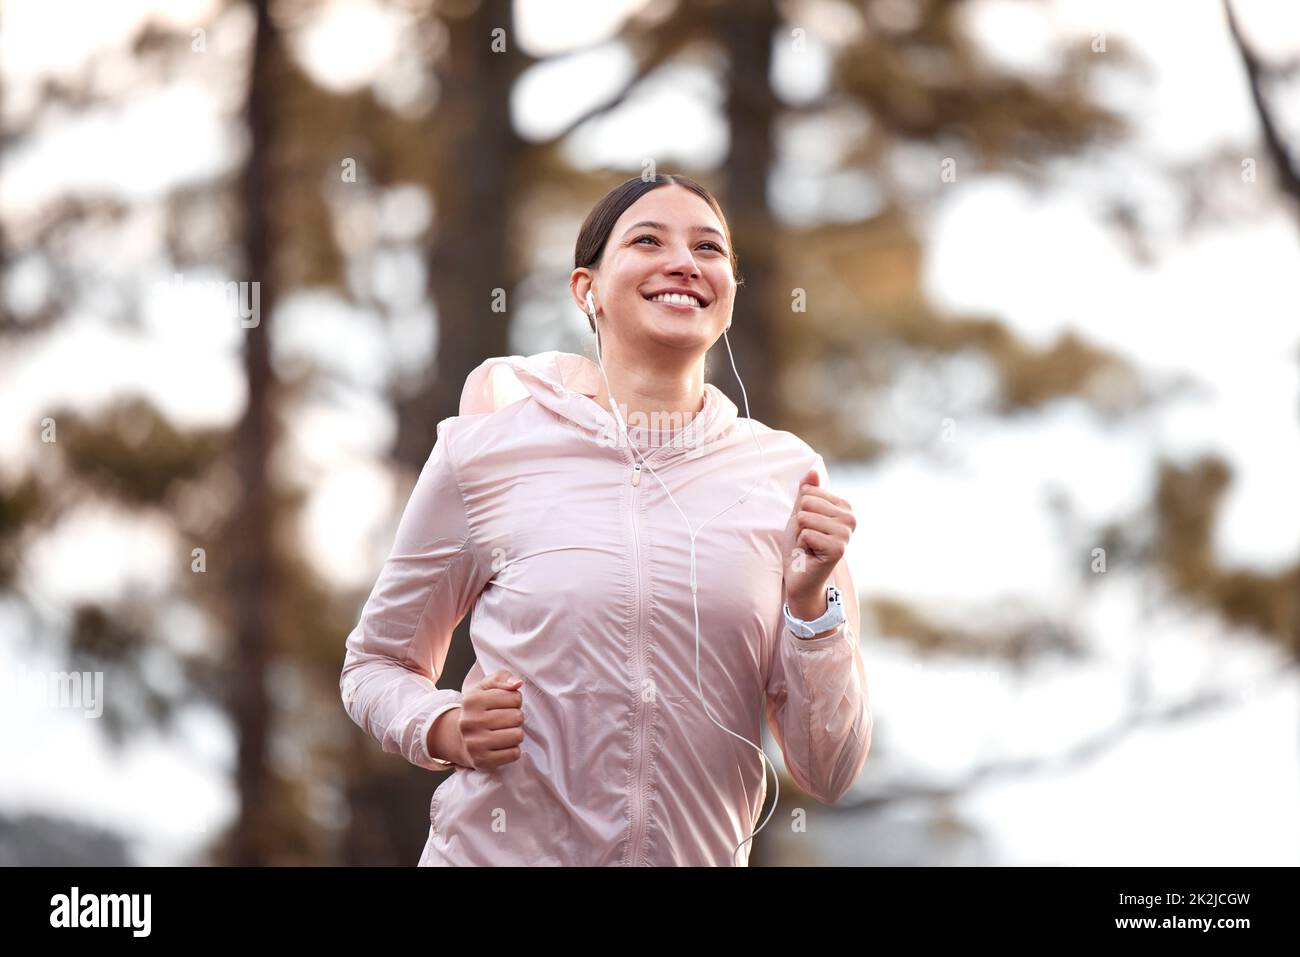 Nothing like a run to clear the mind. Shot of a young female athlete running in nature. Stock Photo